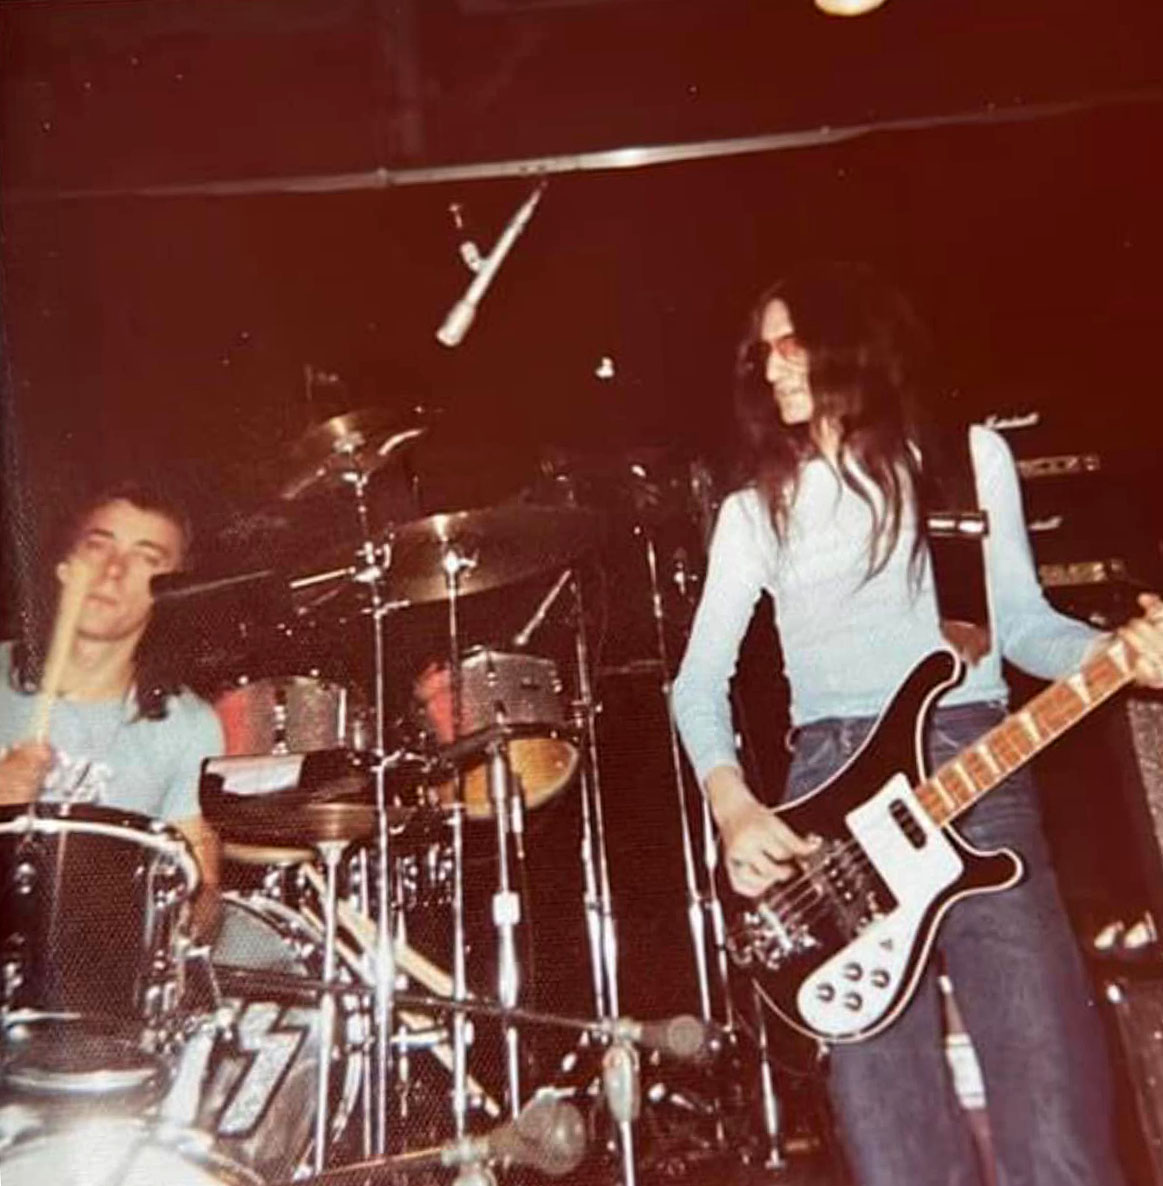 Rush Fly By Night Tour Pictures - William Fremd High School Main Gym - Palatine, Illinois - April 19th, 1975